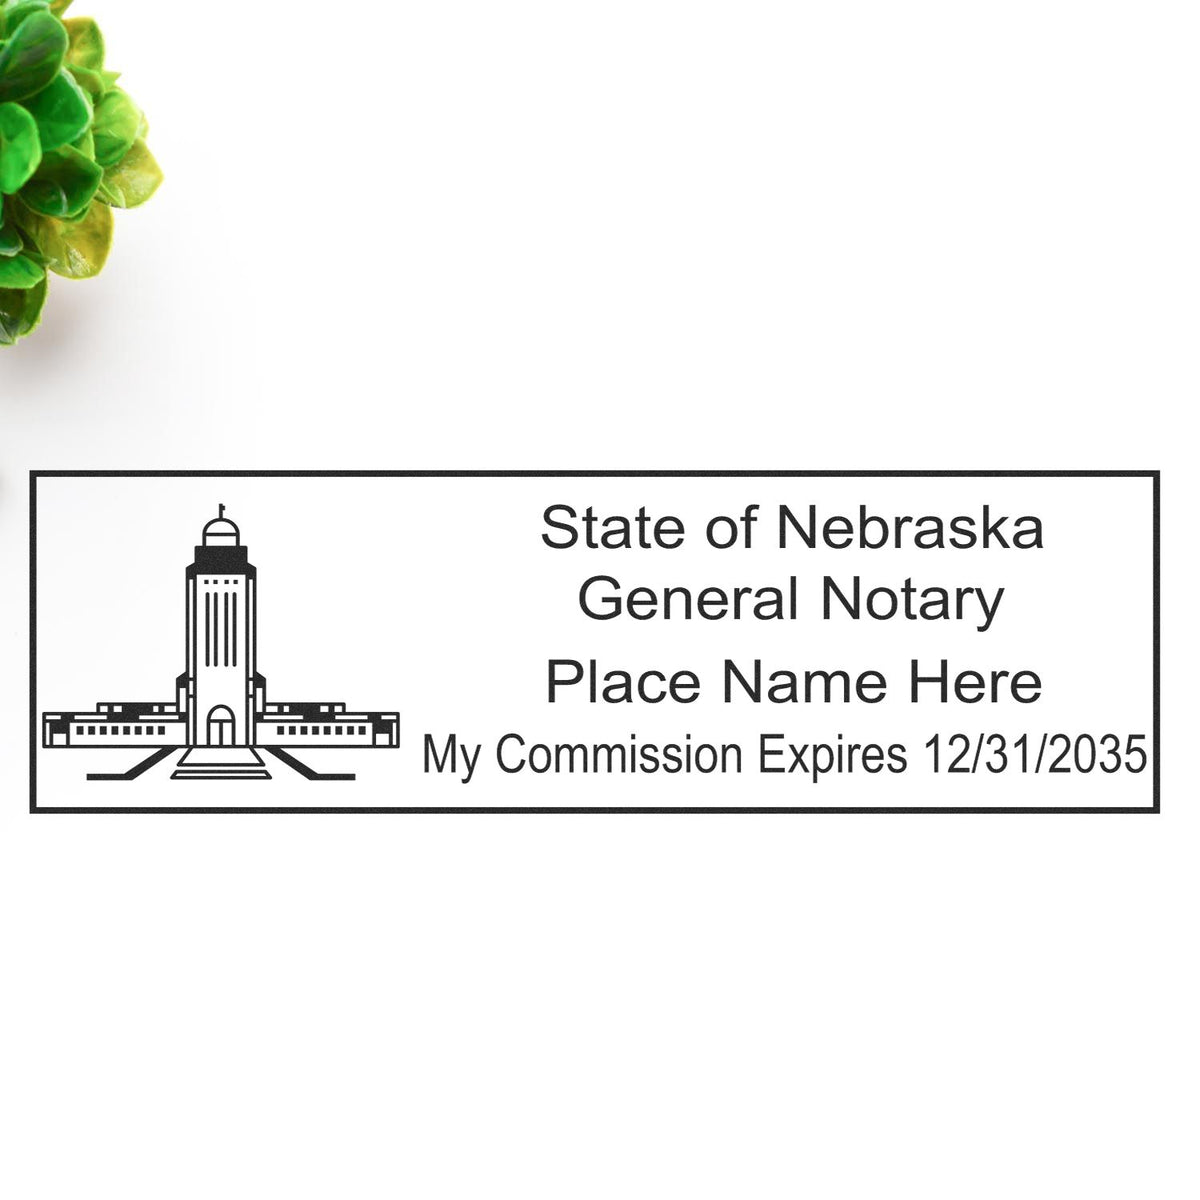 PSI Nebraska Notary Stamp in use photo showing a stamped imprint of the PSI Nebraska Notary Stamp